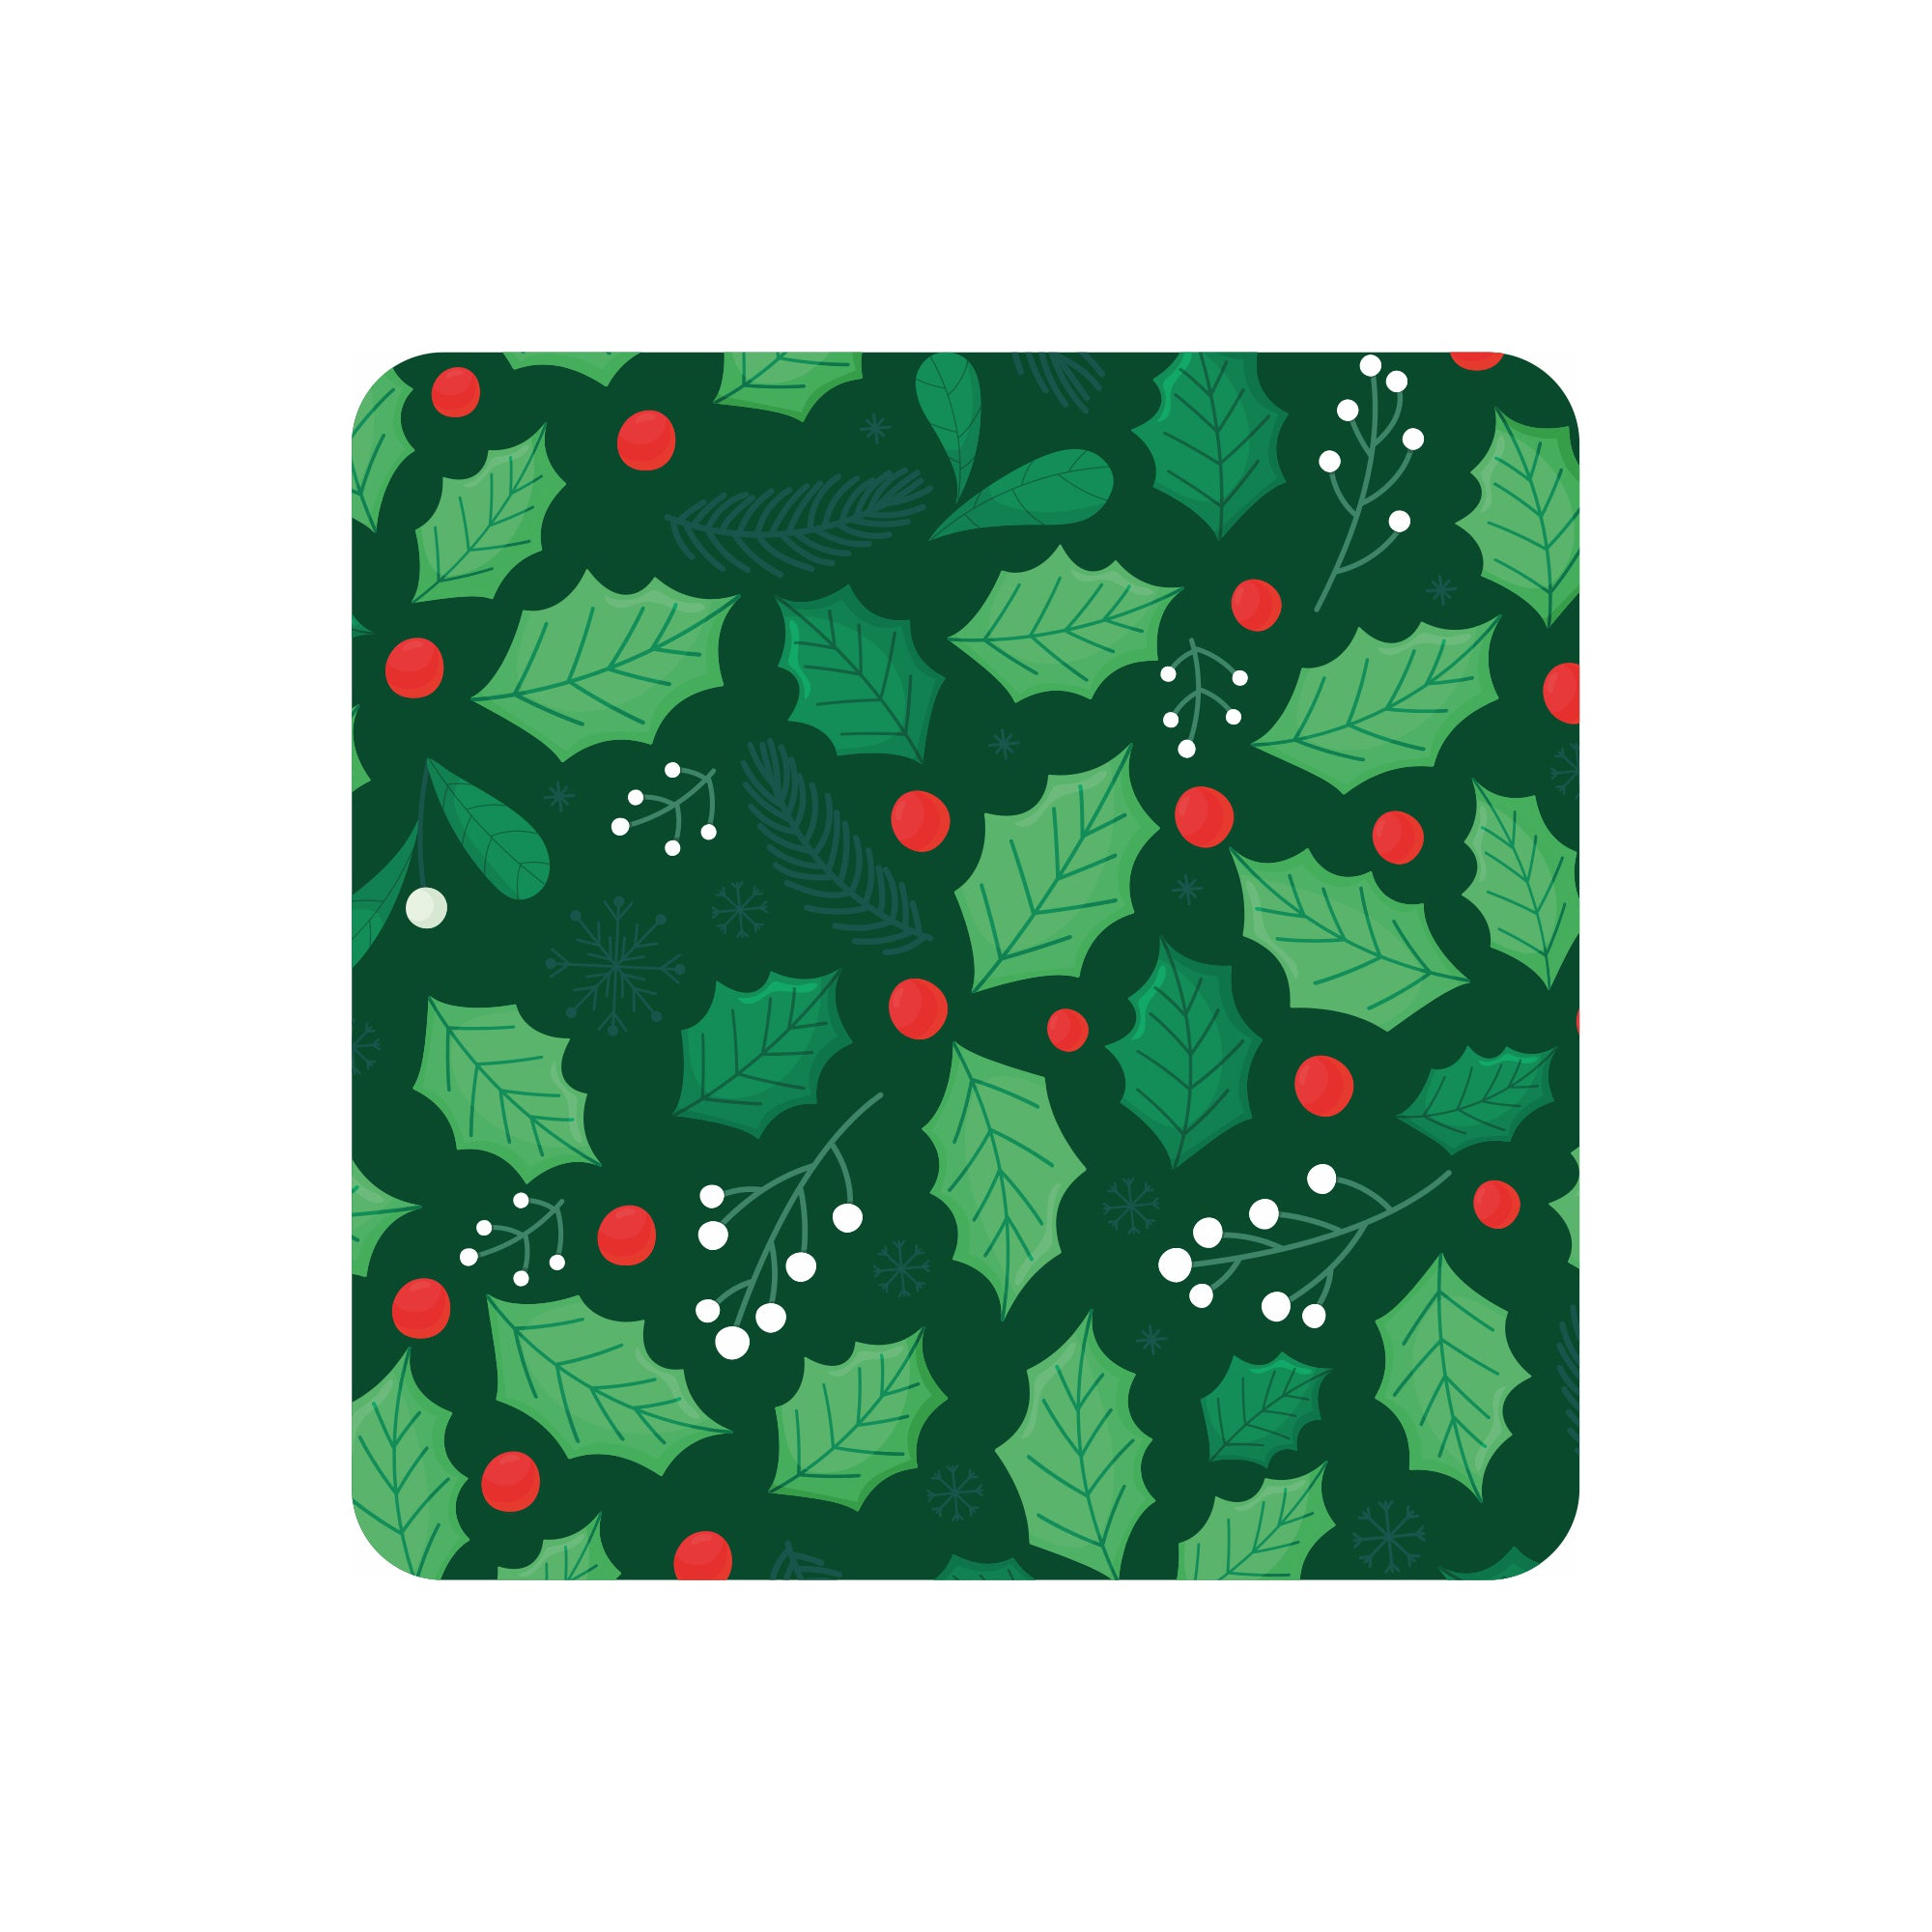 Foil Printed Christmas Placemat & Coaster Set - Holly Berries, W12 x H15 inches, W4 x H4 inches, 6pc each